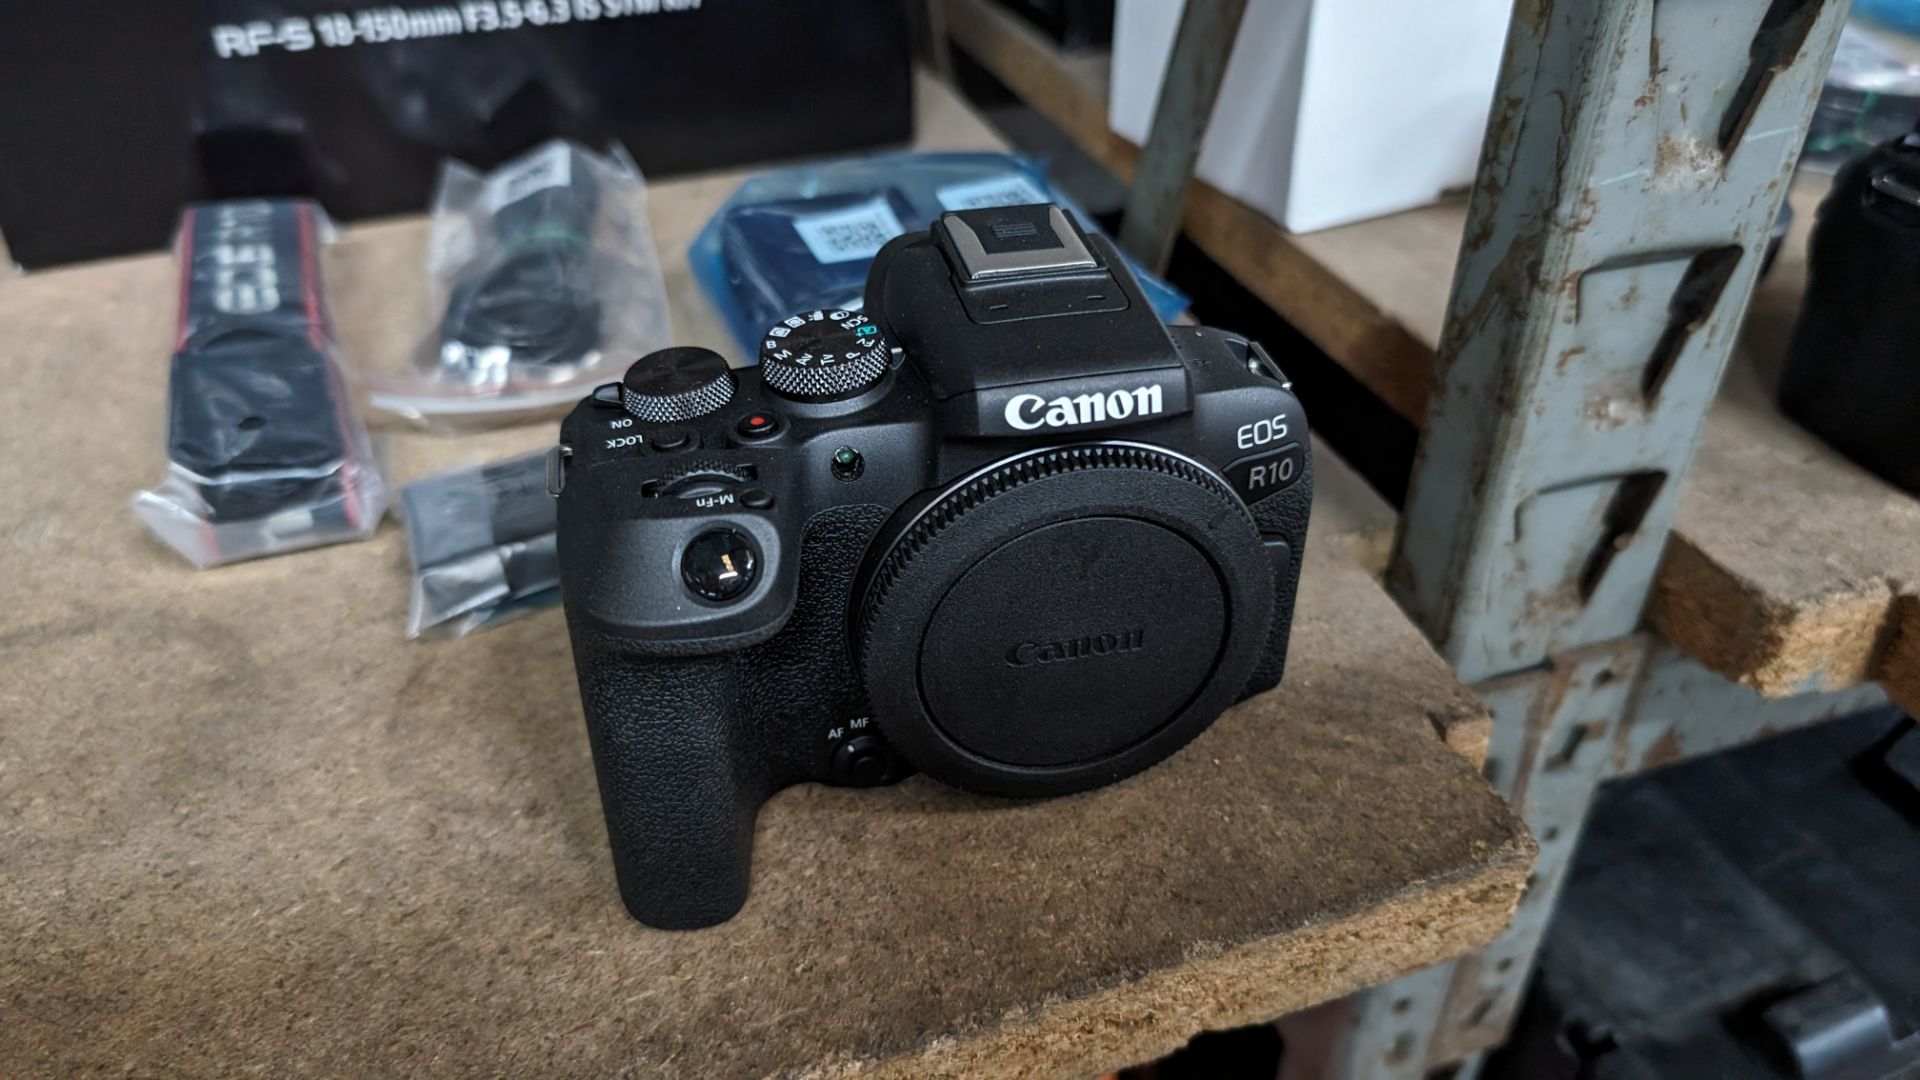 Canon EOS R10 camera, including battery, charger, strap and more - no lens